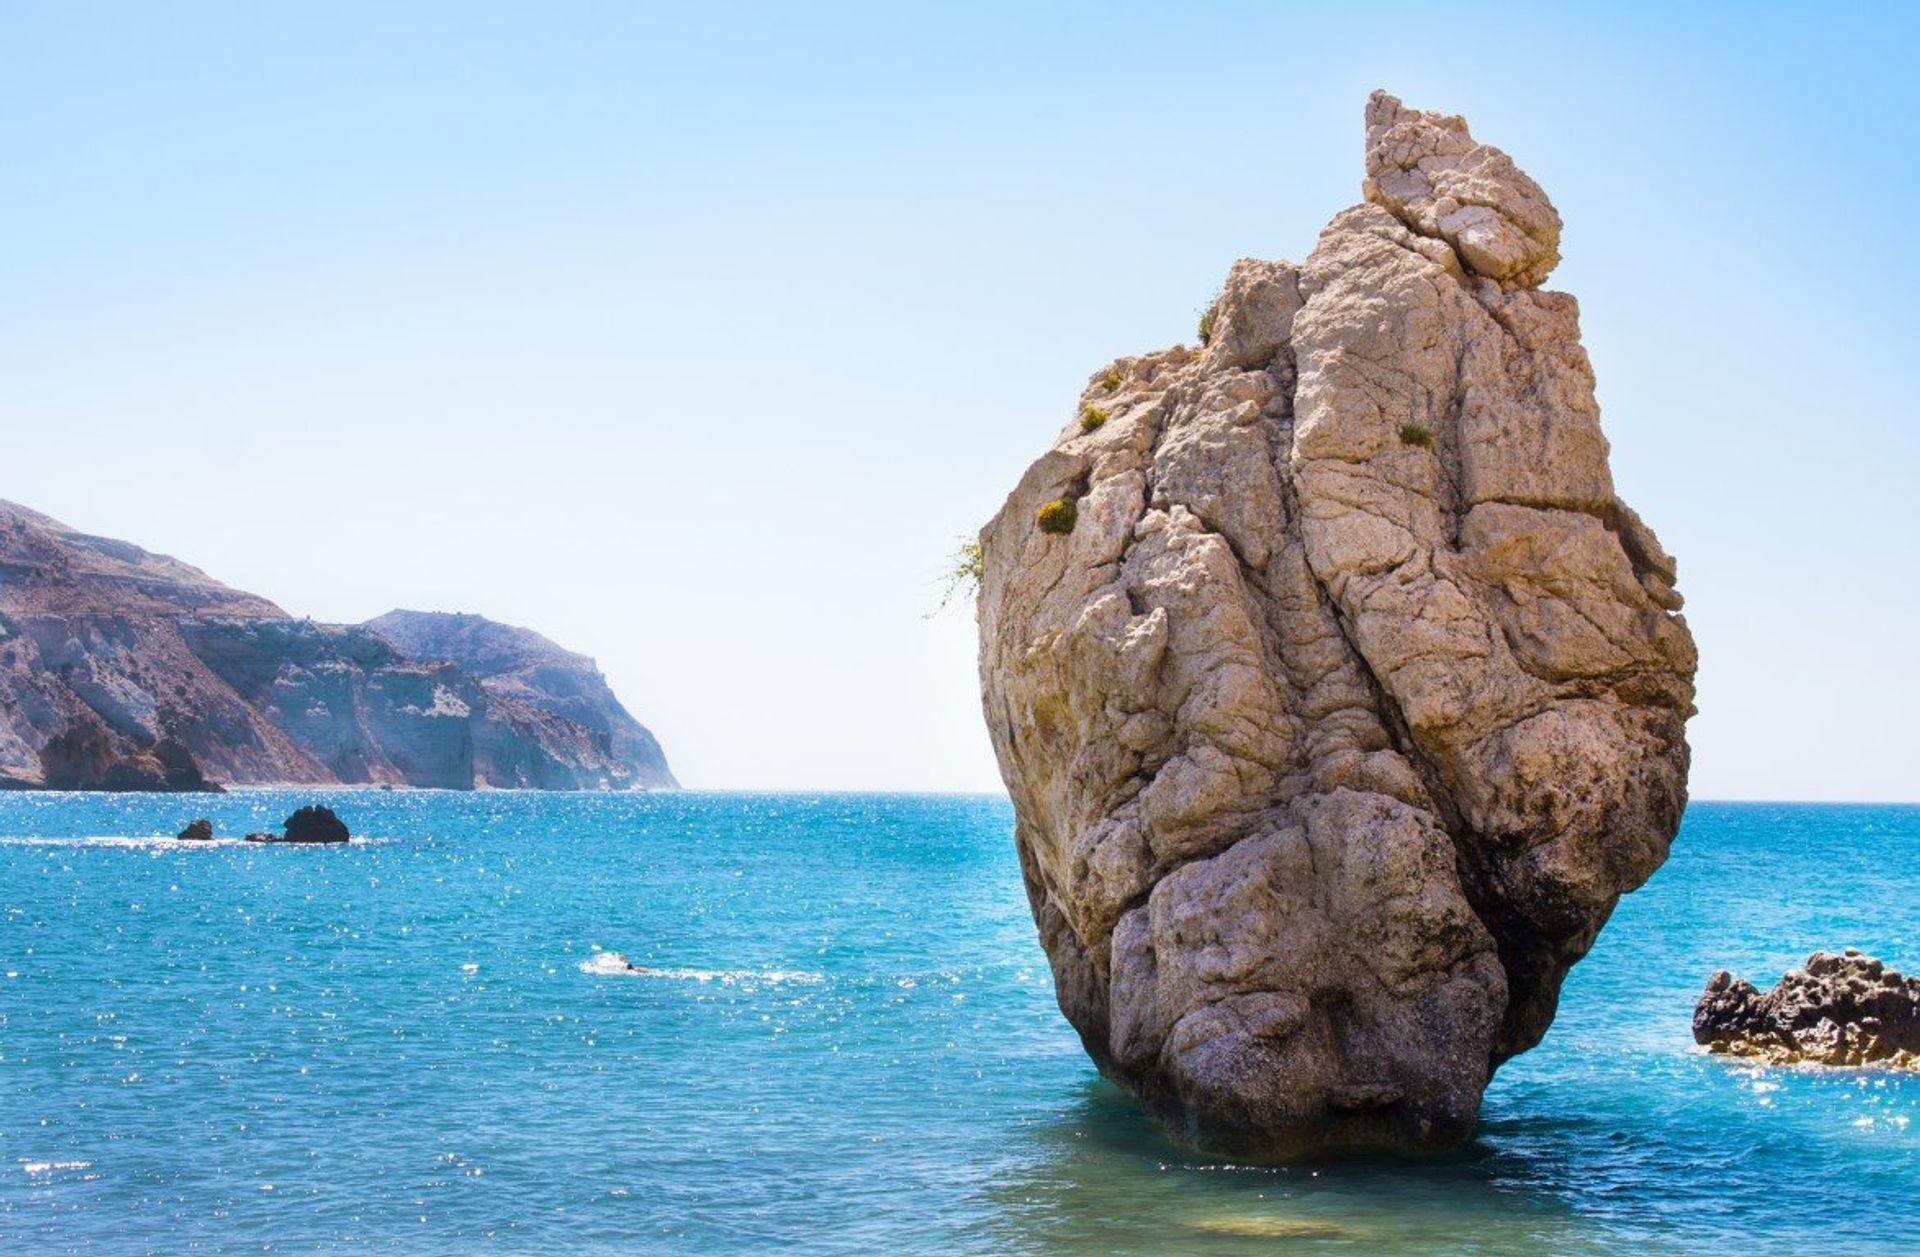 A spot for lovers! The legendary Aphrodite's Rock on the coast of Paphos